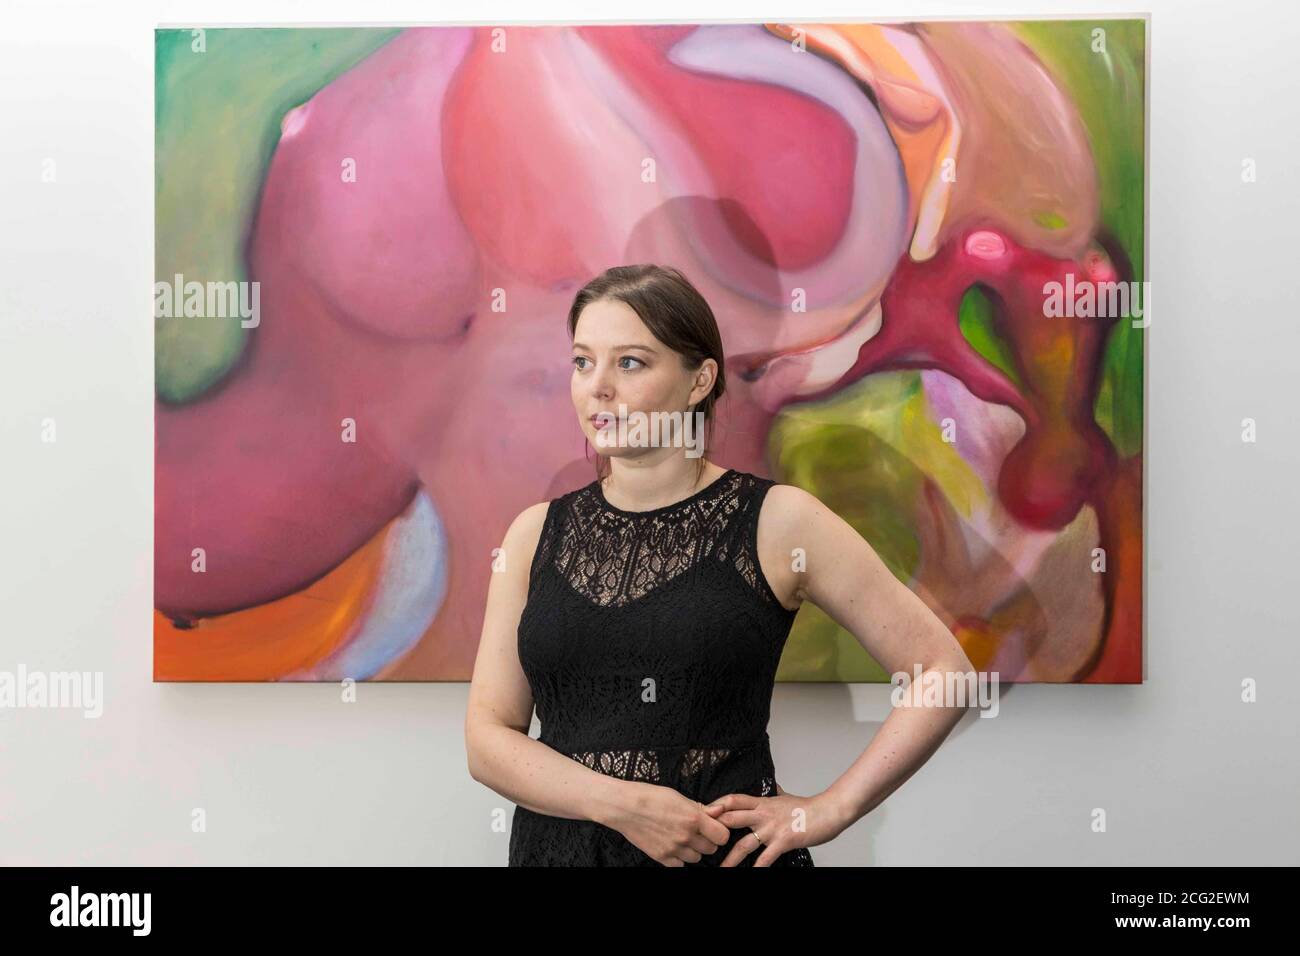 Edinburgh , United Kingdom. 09 September, 2020 Pictured: Curator and one of the artists, Rhiannon Rebecca Salisbury with her work Lilith. Ancient Deities is a brand-new group exhibition featuring mixed media work by eighteen emerging artists at Edinburgh’s Arusha Gallery from 10 September to 18 October.  Credit: Rich Dyson/Alamy Live News Stock Photo